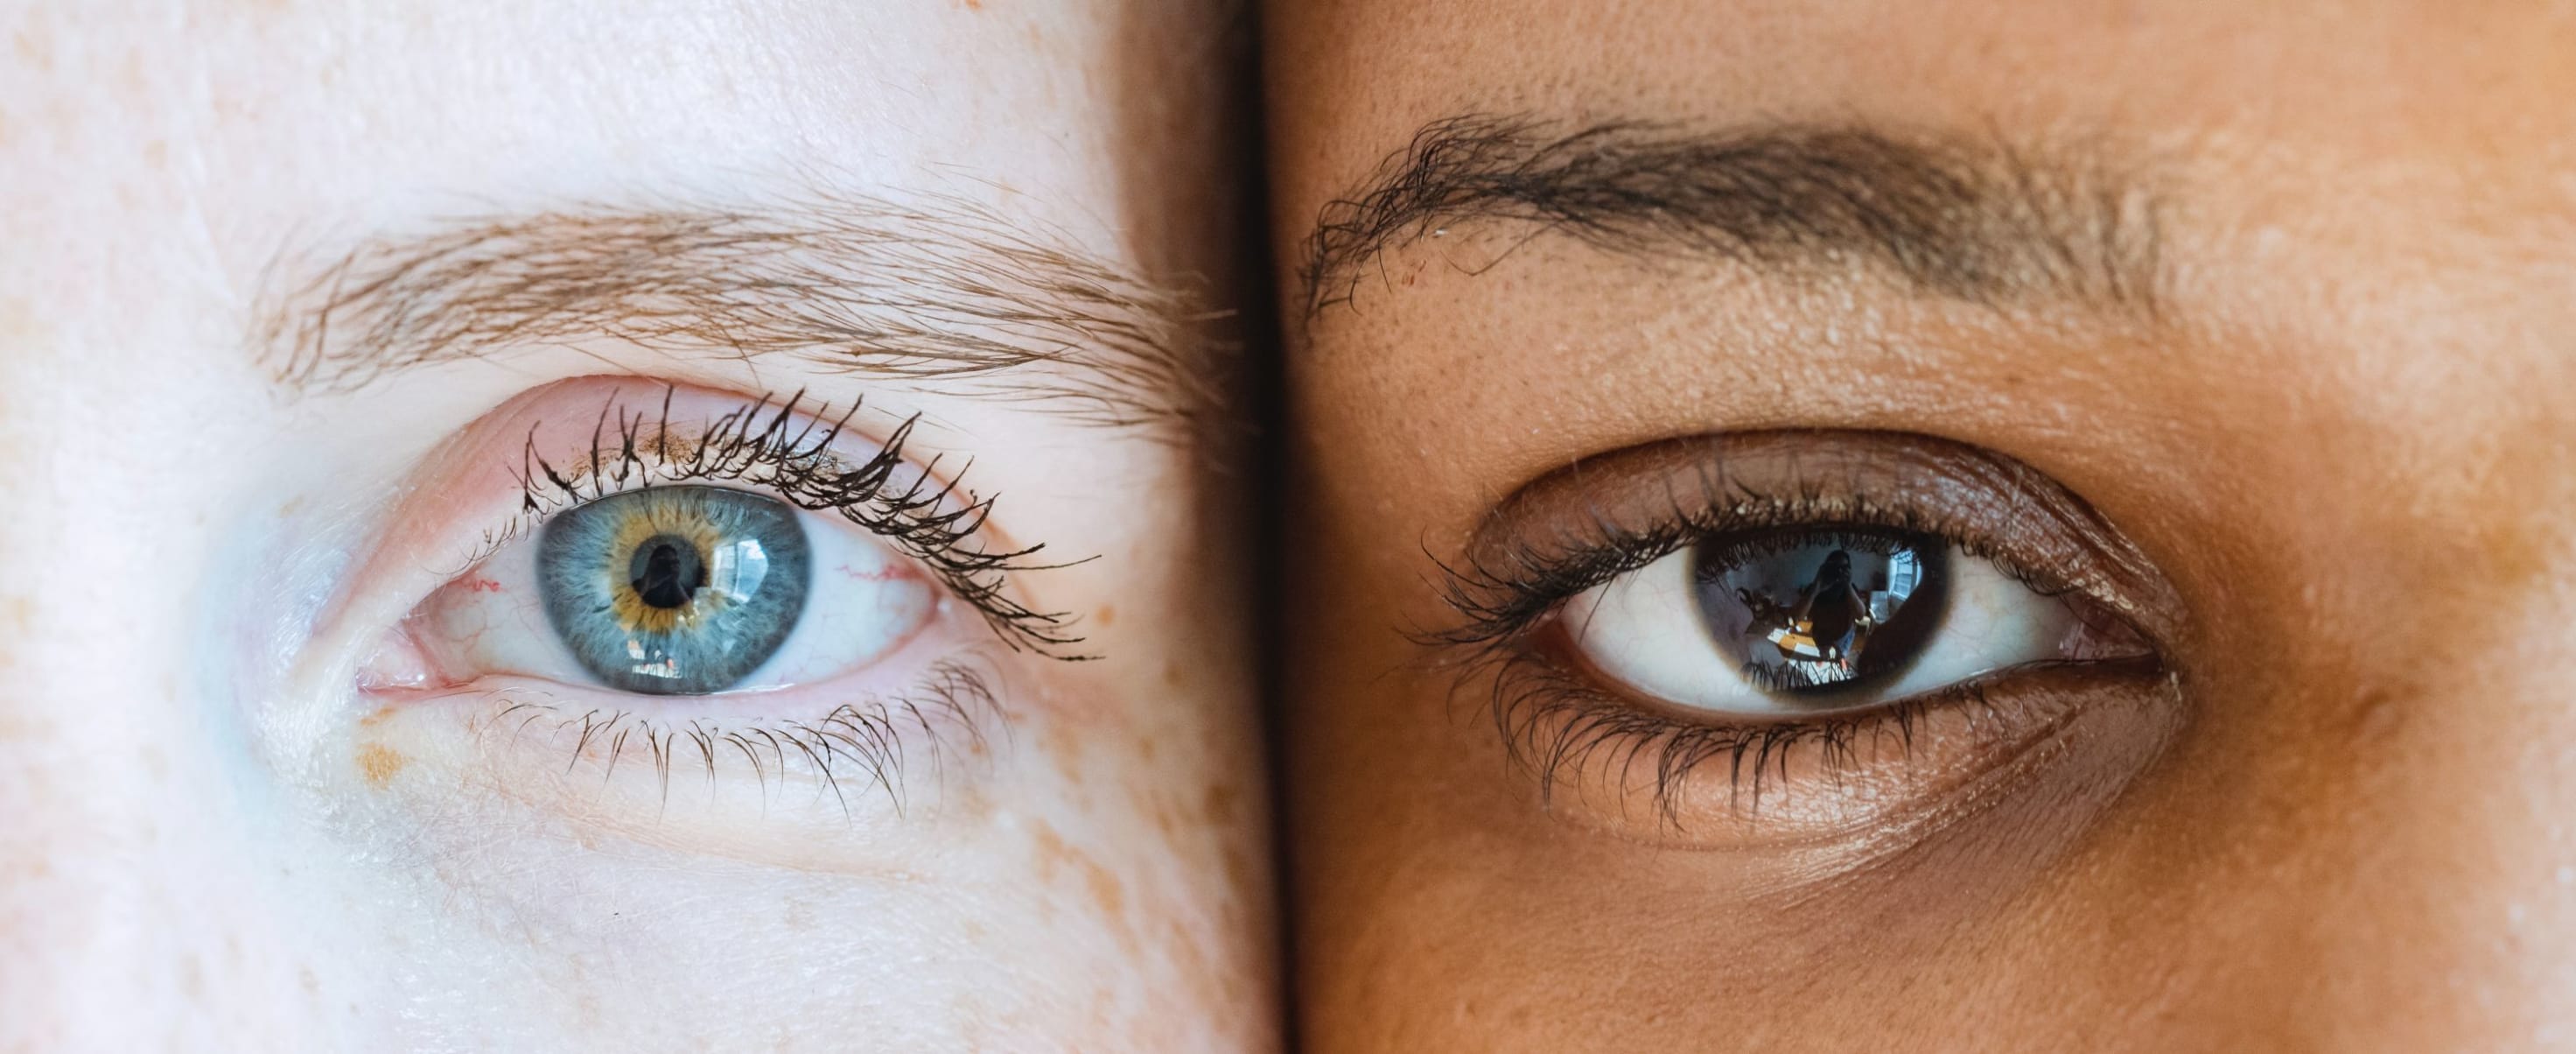 Close up of the eyes of two people of different ethnic backgrounds.